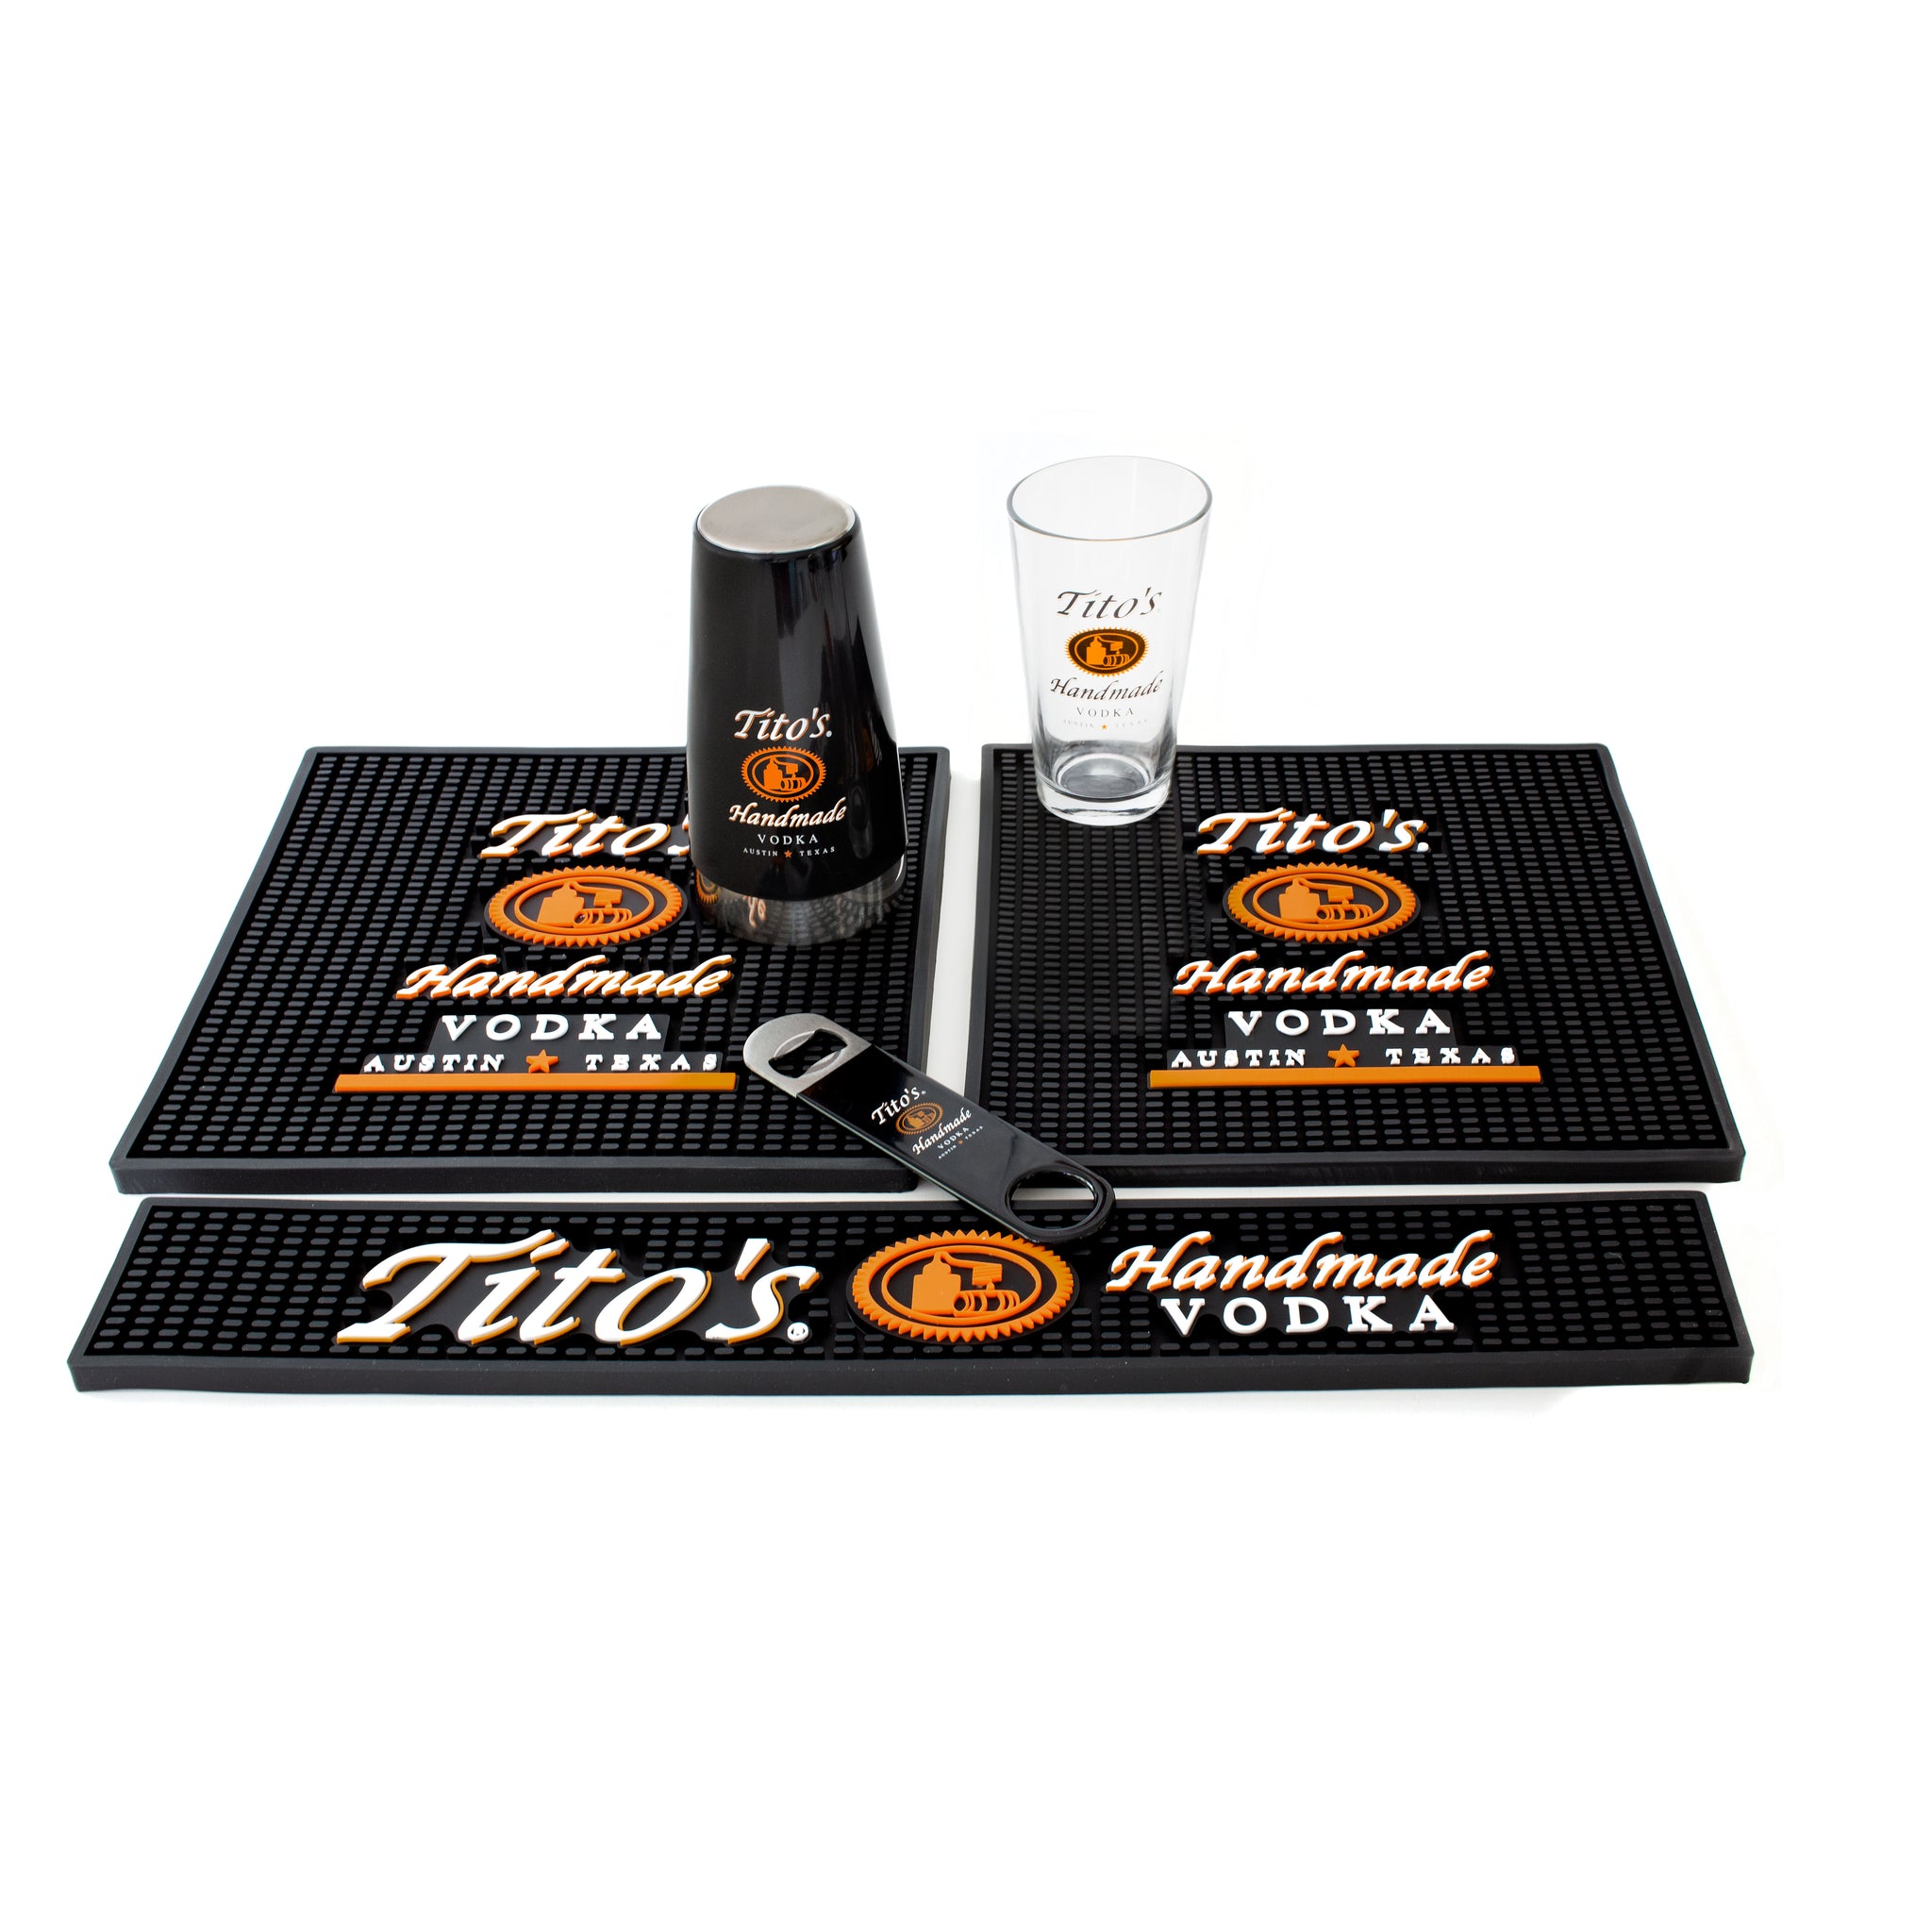 Kit includes: 1 Tito's rail mat, 2 Tito's square mats, one Tito's bottle opener, and one Tito's shaker and pint glass set